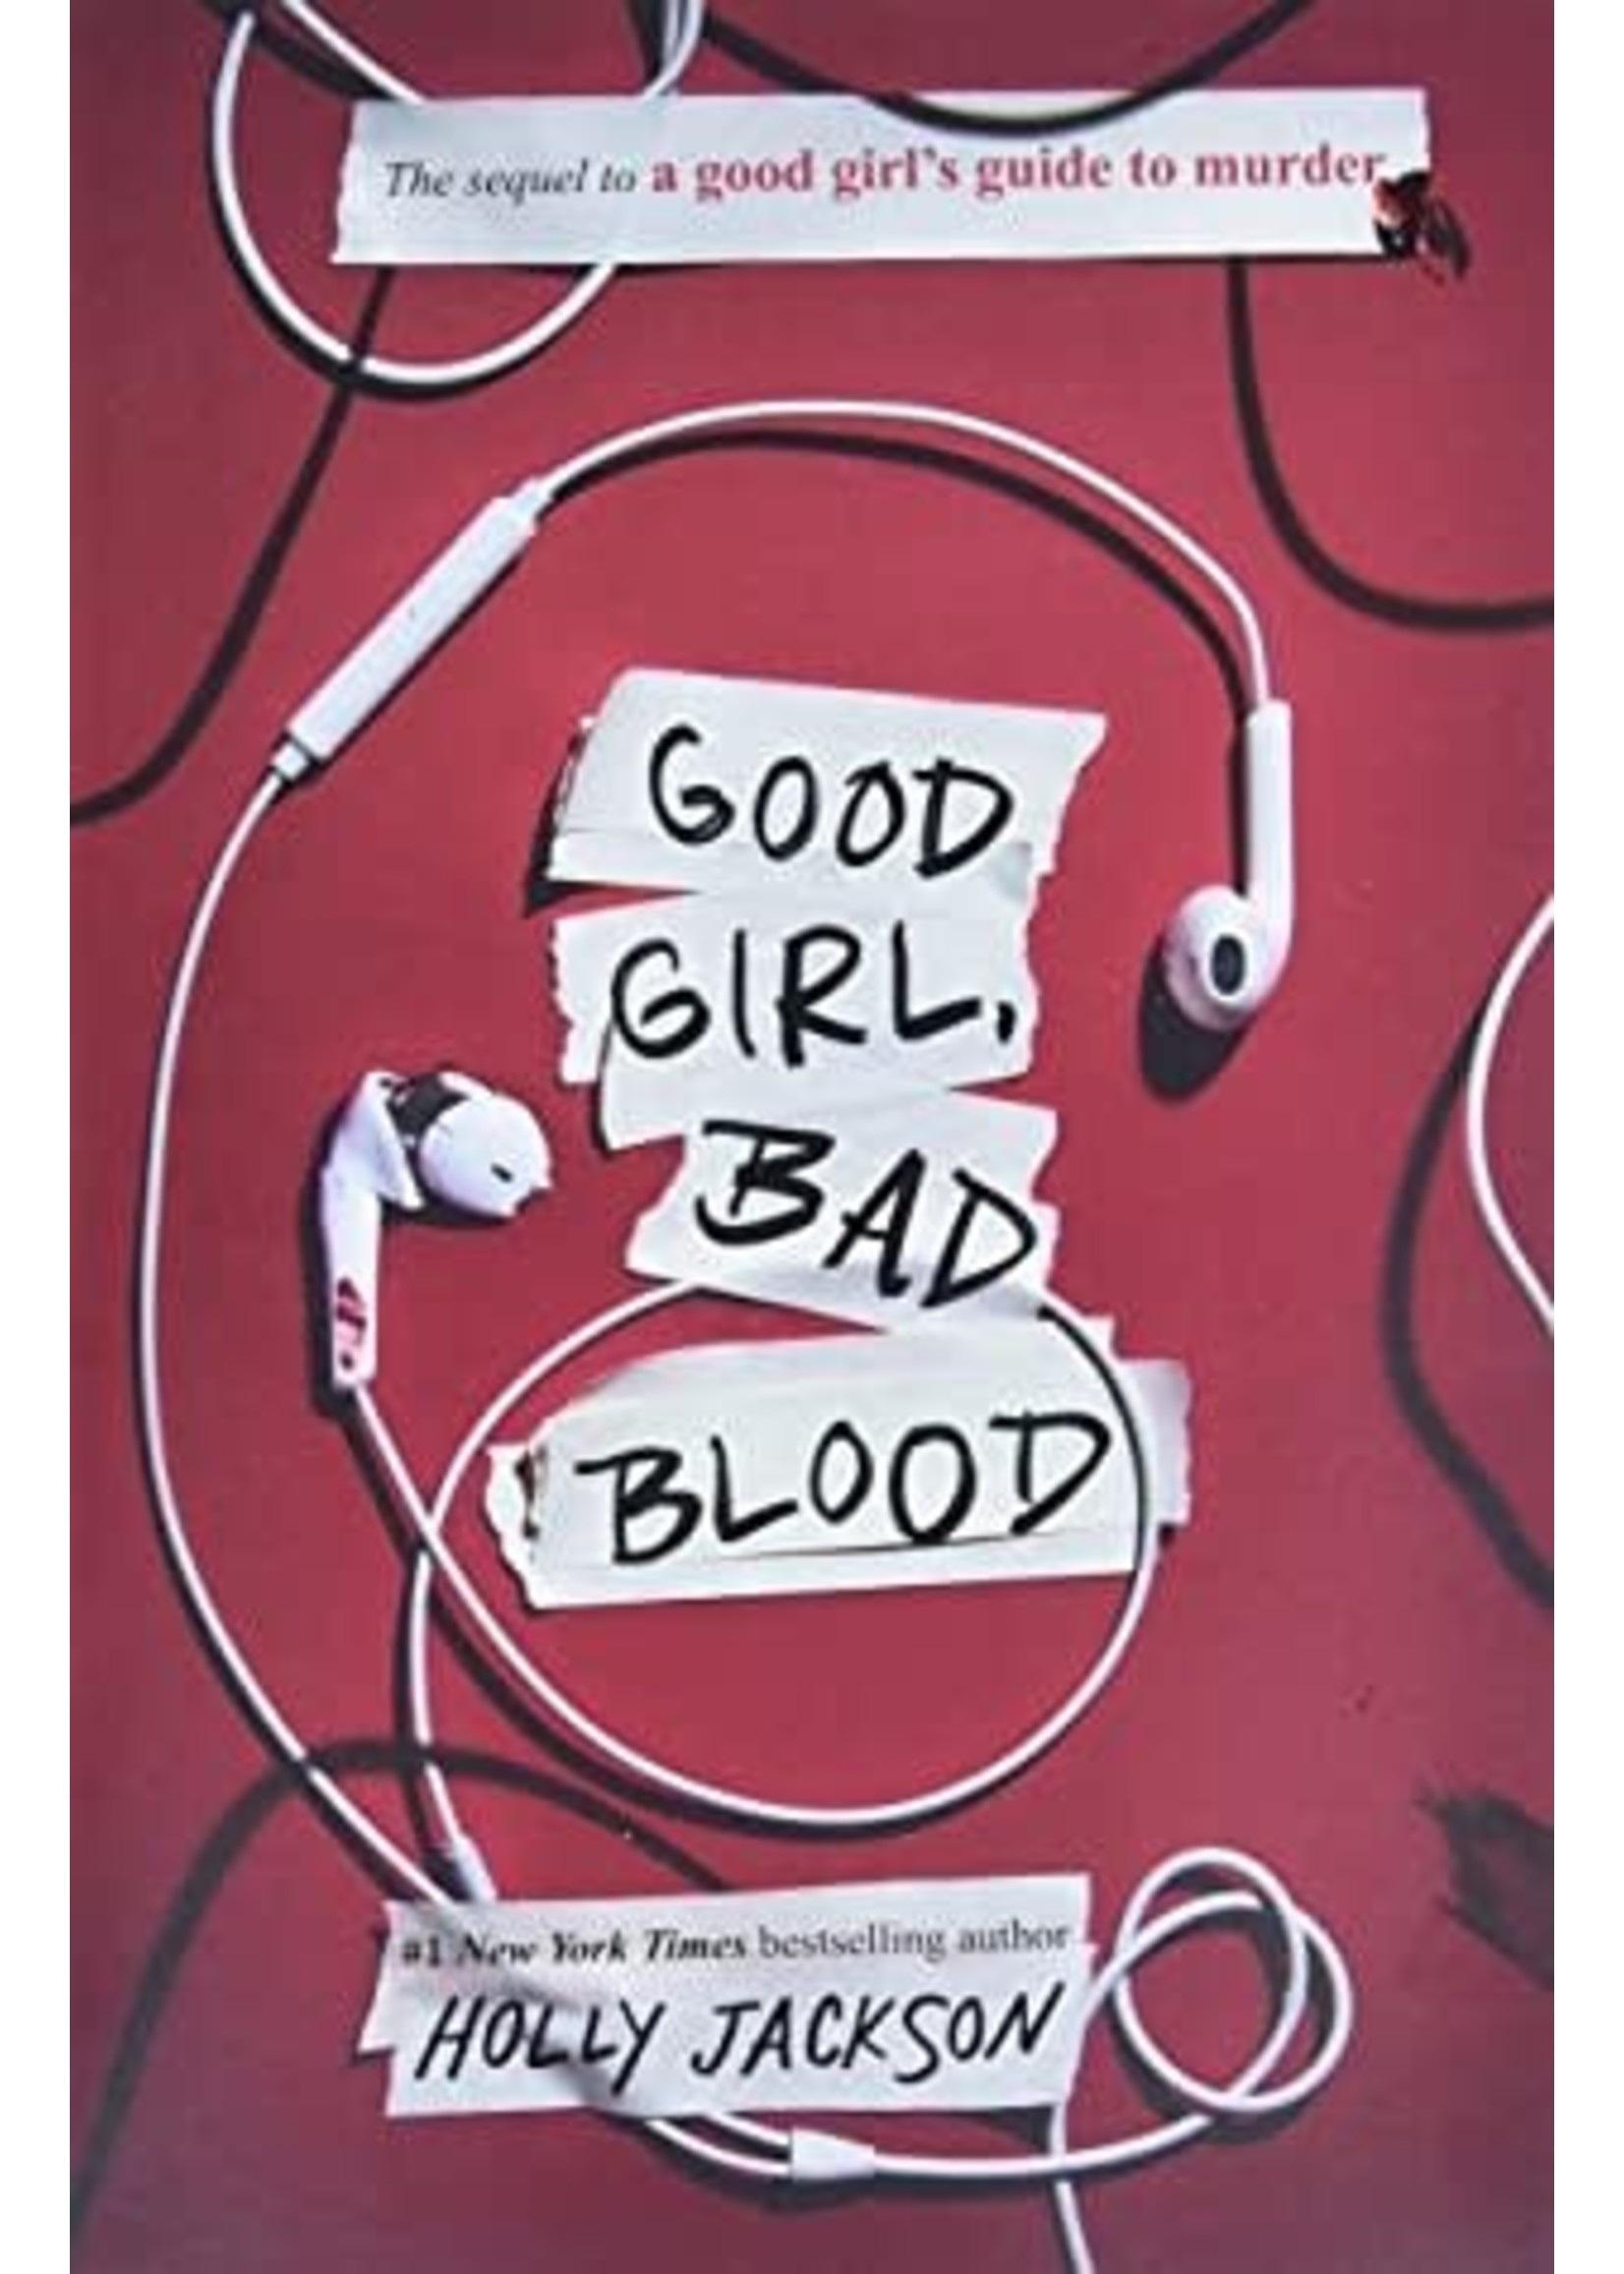 Good Girl, Bad Blood (A Good Girl's Guide to Murder #2) by Holly Jackson